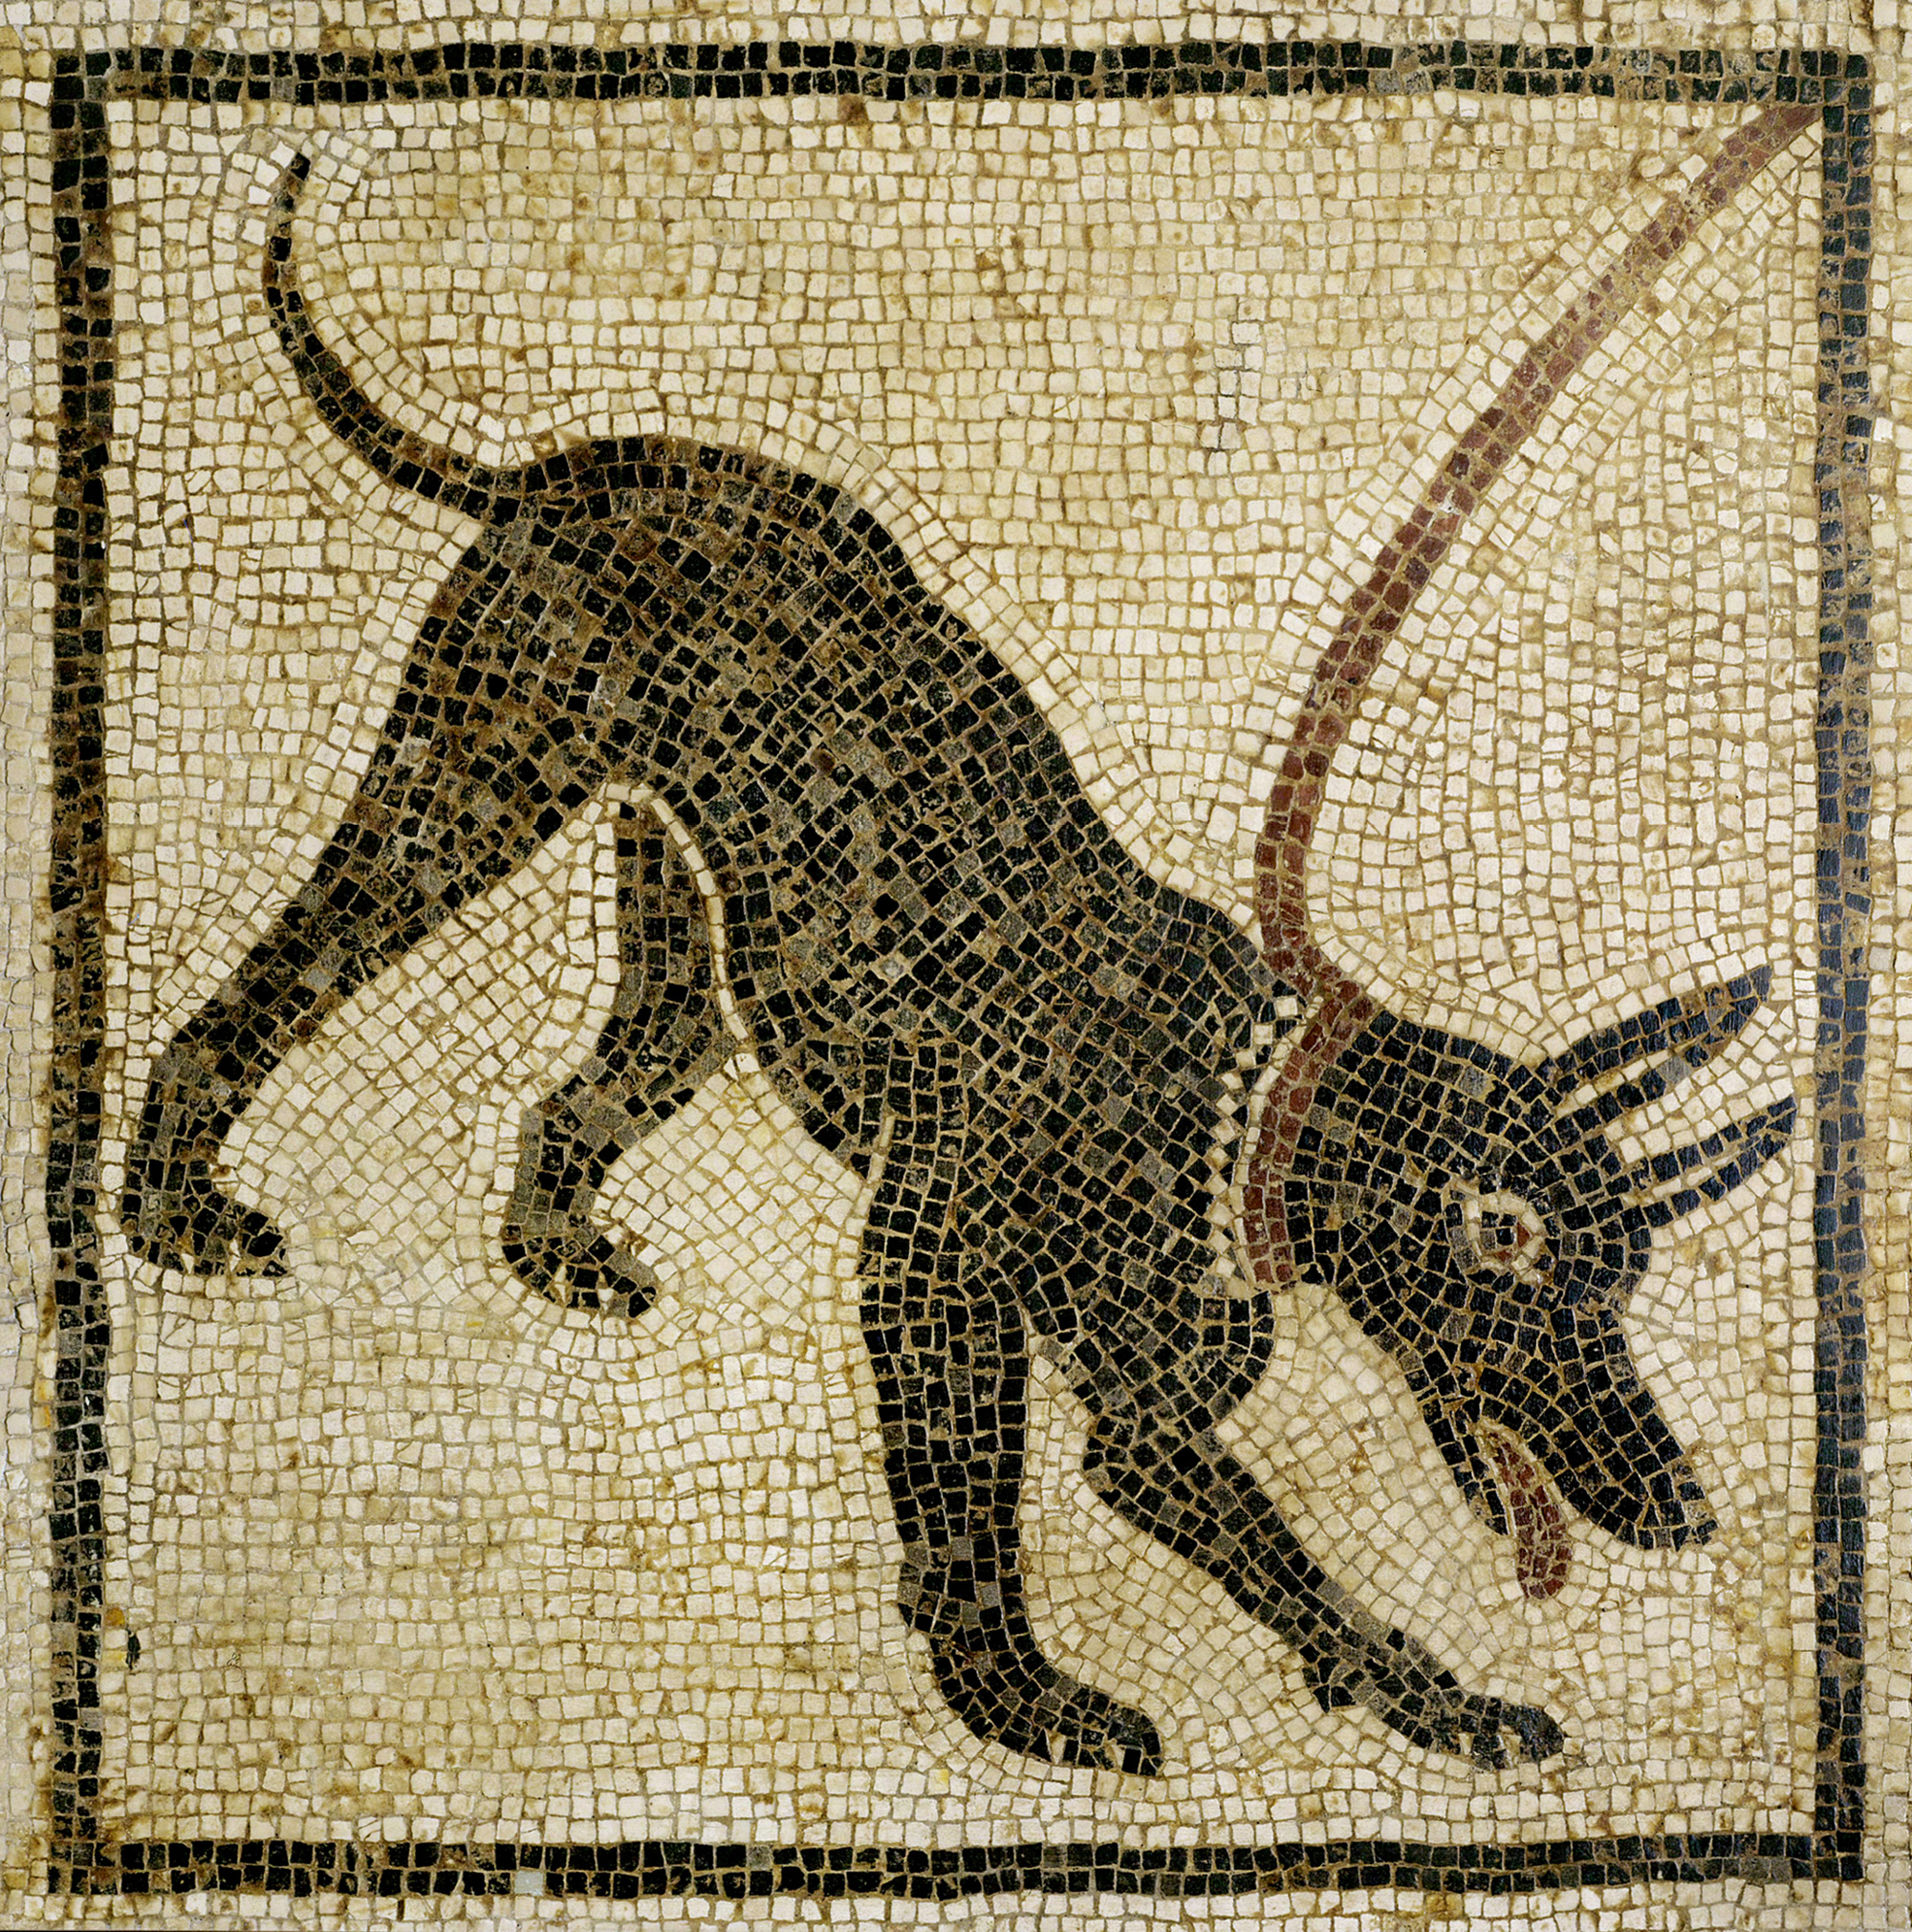 Mosaic from the “House of Orpheus” in Pompeii warning would-be thieves of the presence of a guard dog, first century CE.